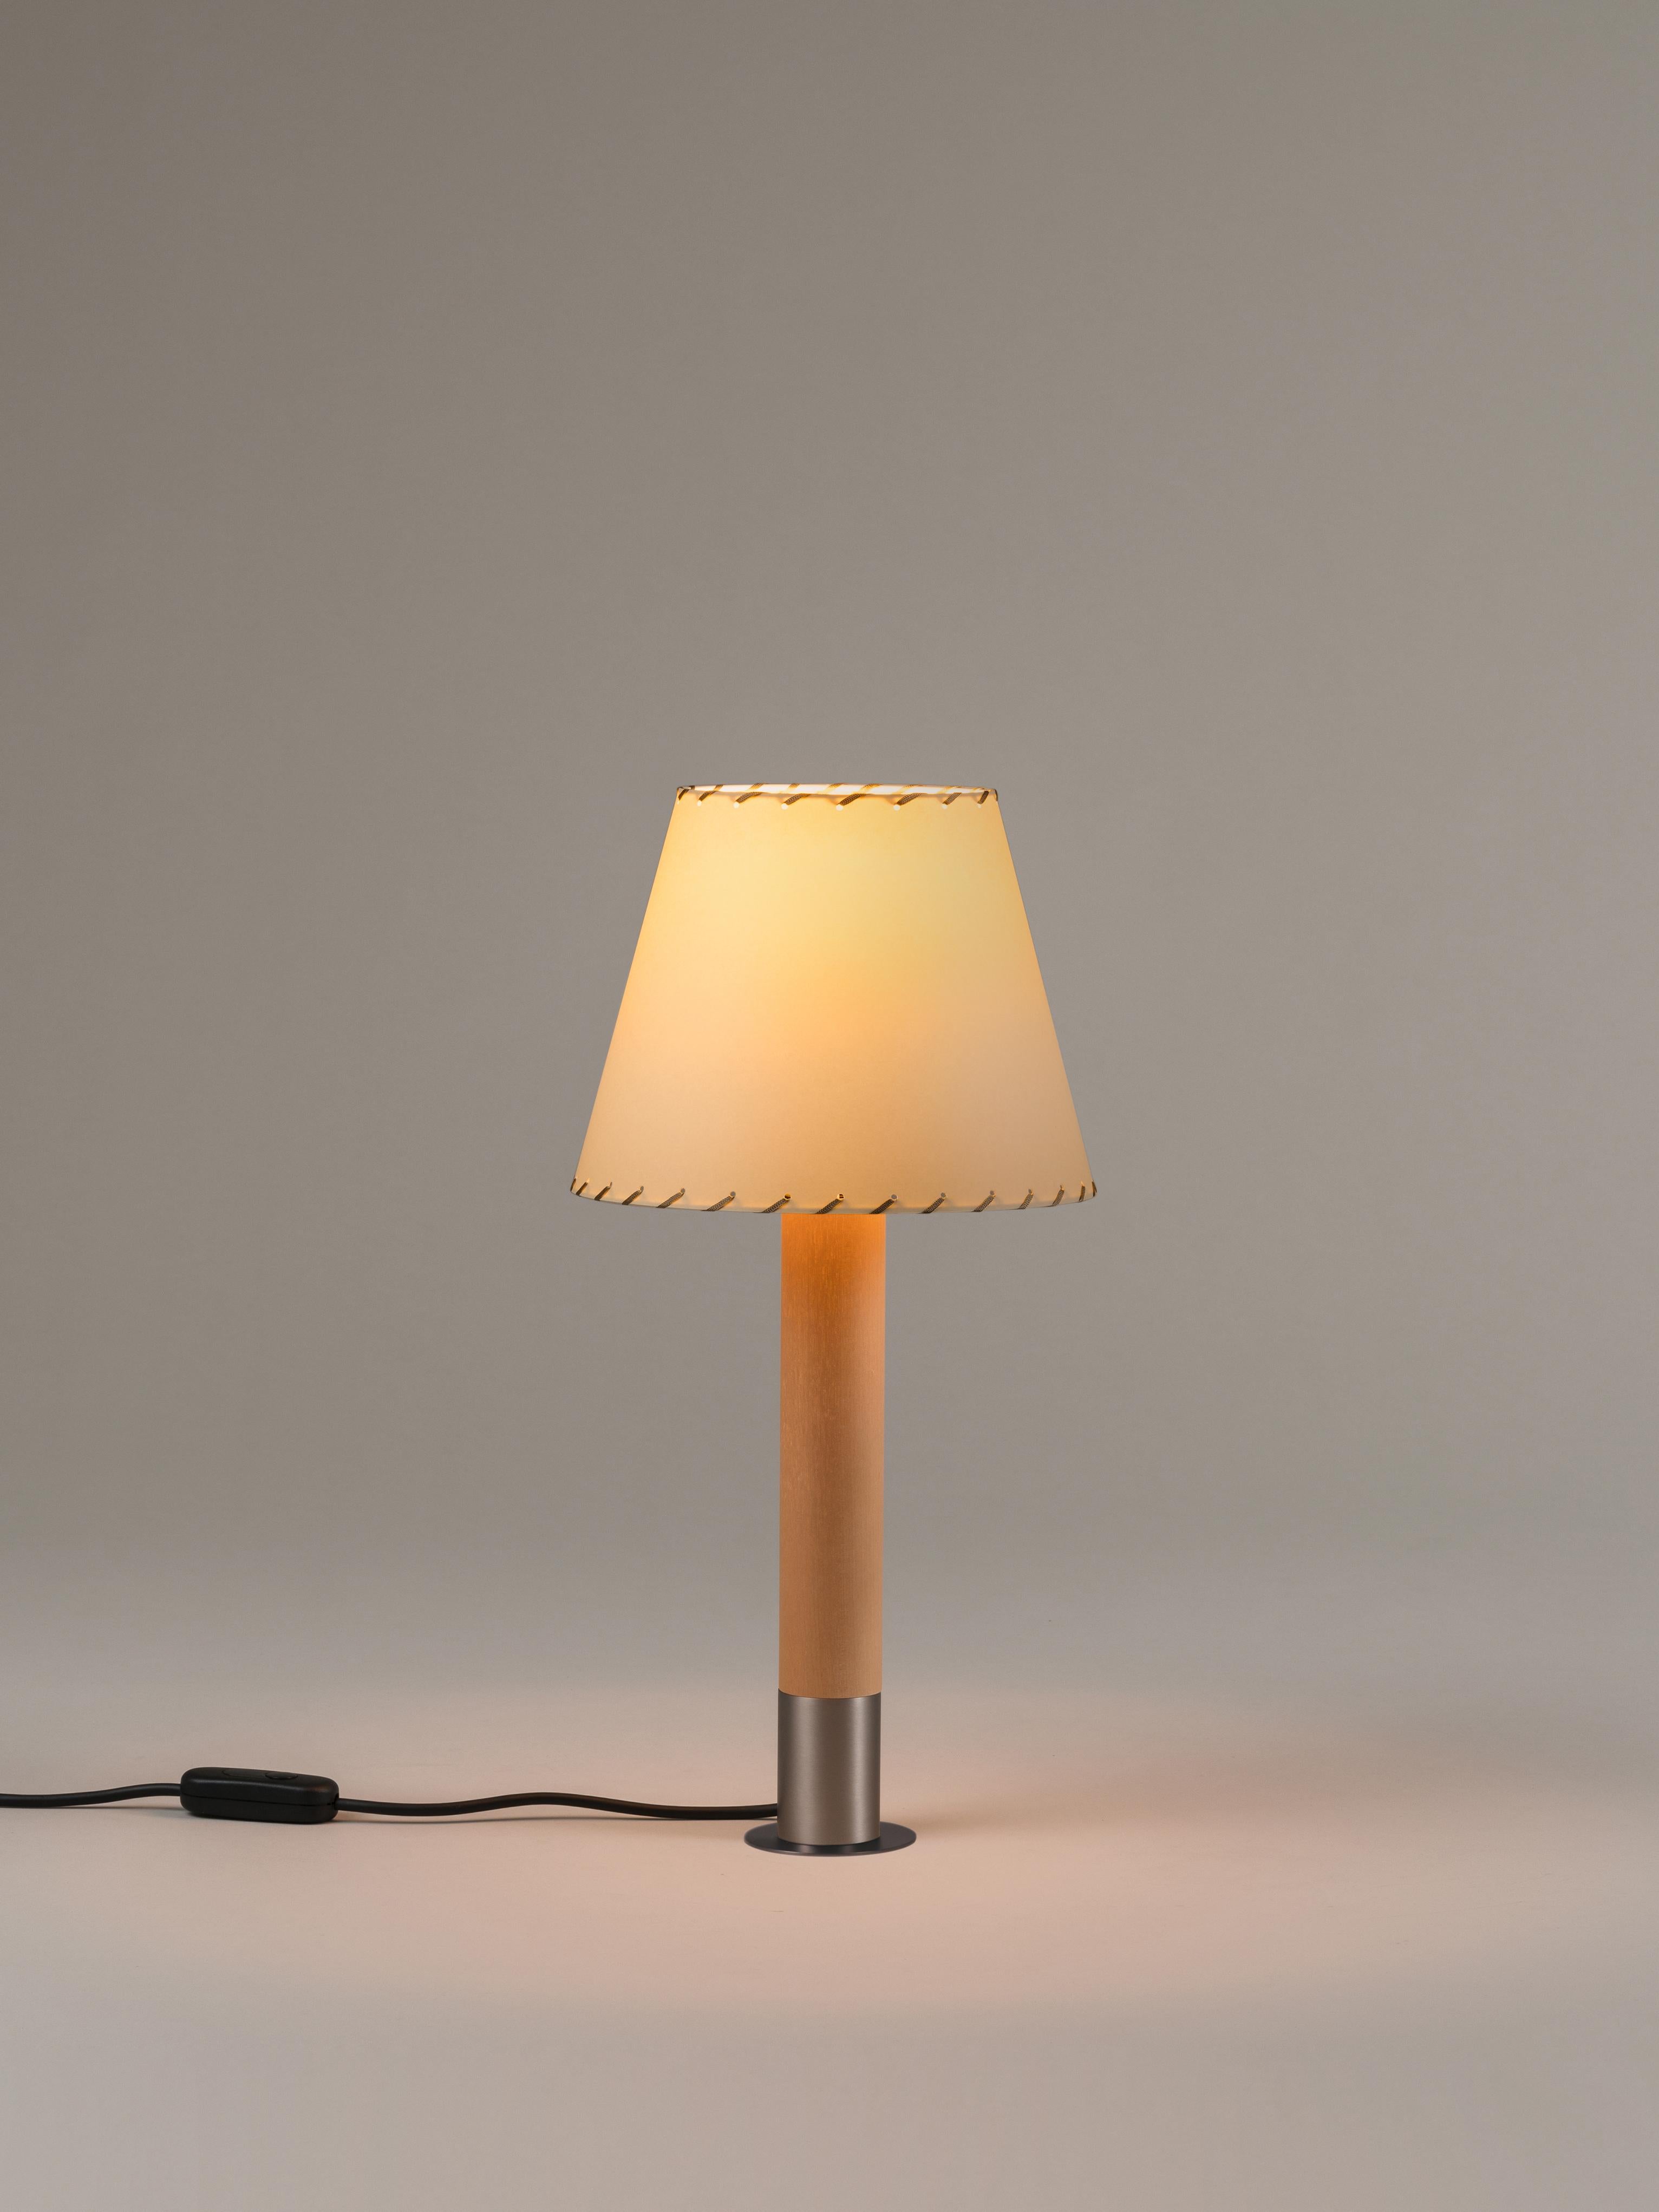 Nickel and Beige Básica M1 table lamp by Santiago Roqueta, Santa & Cole
Dimensions: D 25 x H 52 cm
Materials: Nickel, birch wood, paperboard.
Available in other shade colors and with or without the stabilizing disc.
Available in nickel or